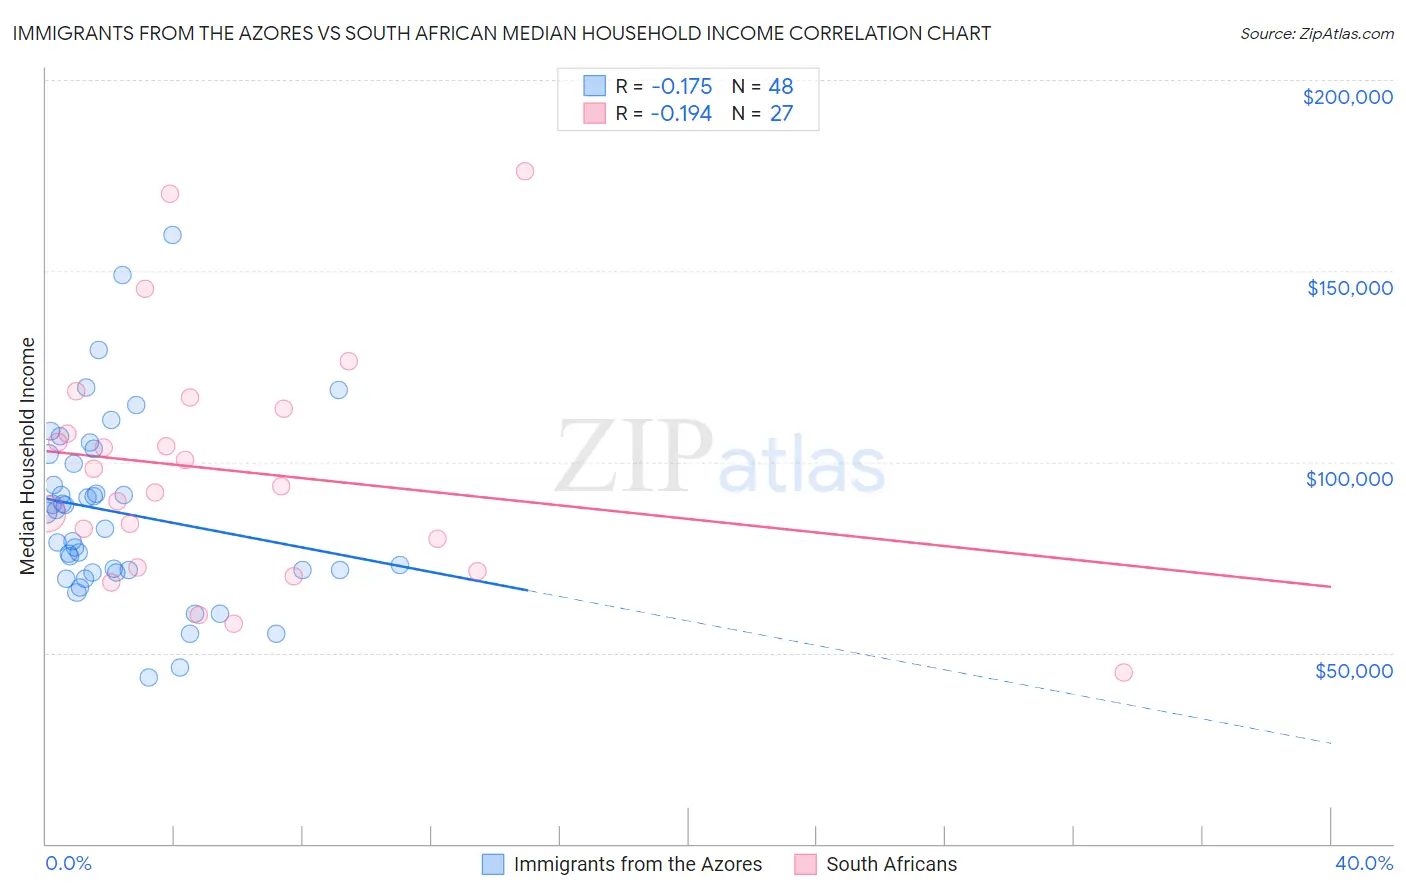 Immigrants from the Azores vs South African Median Household Income